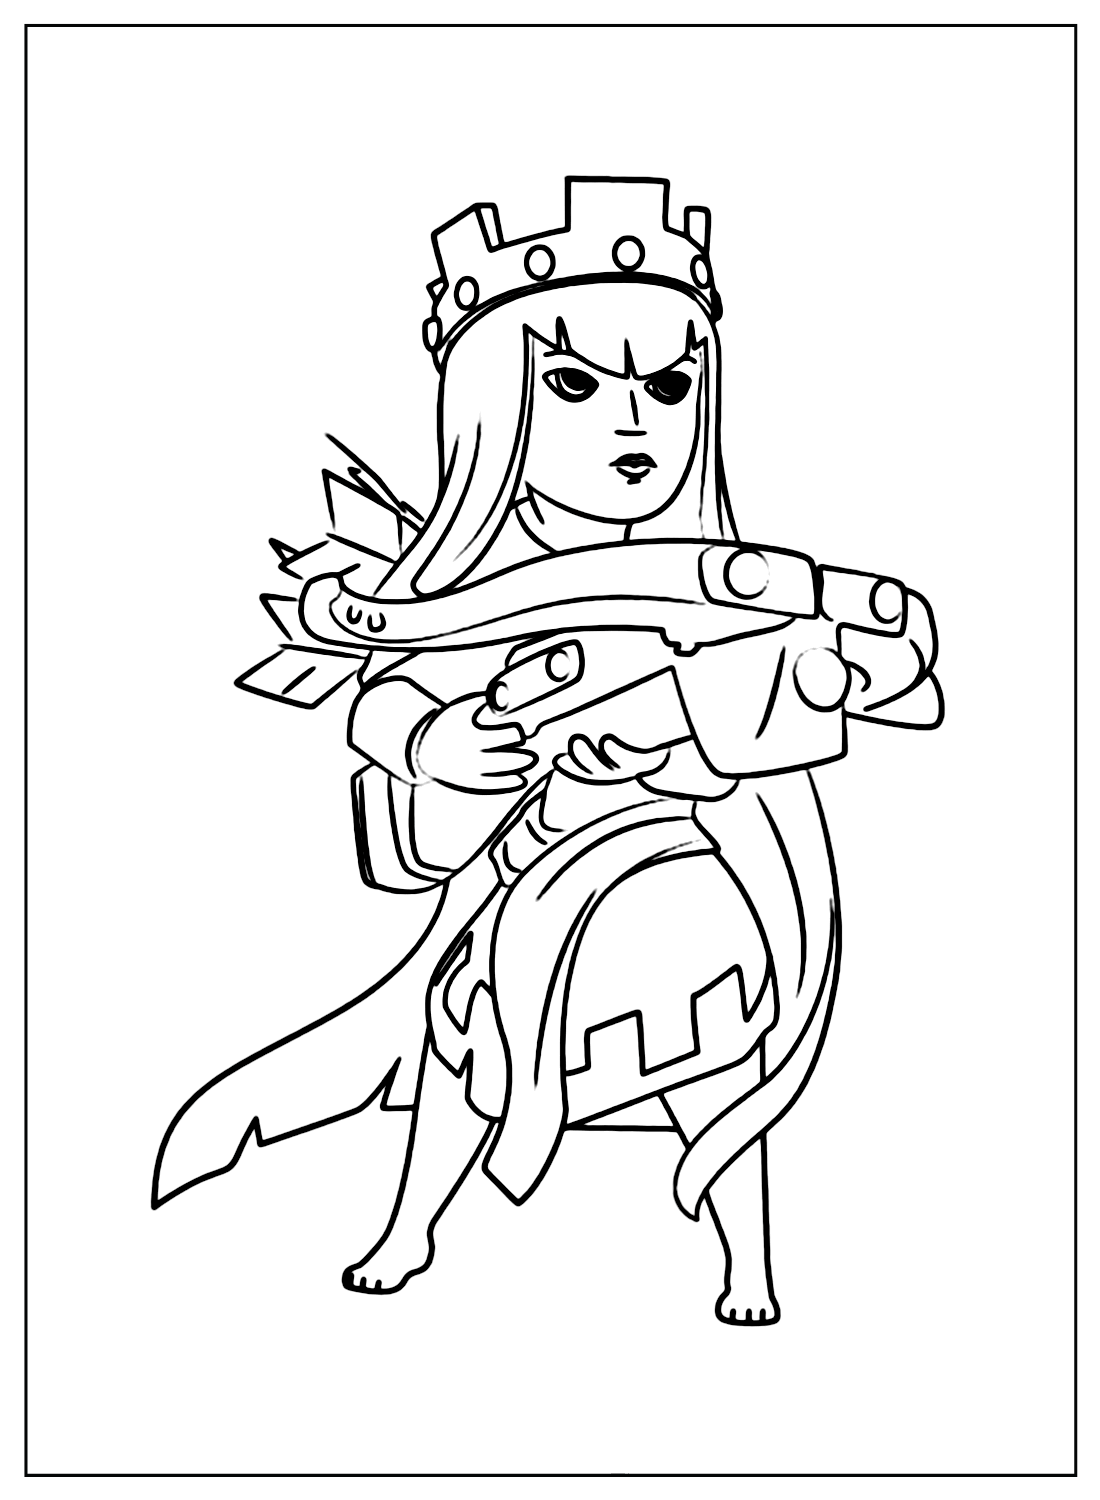 Archer Queen Clash Of Clans Coloring Page from Clash of Clans